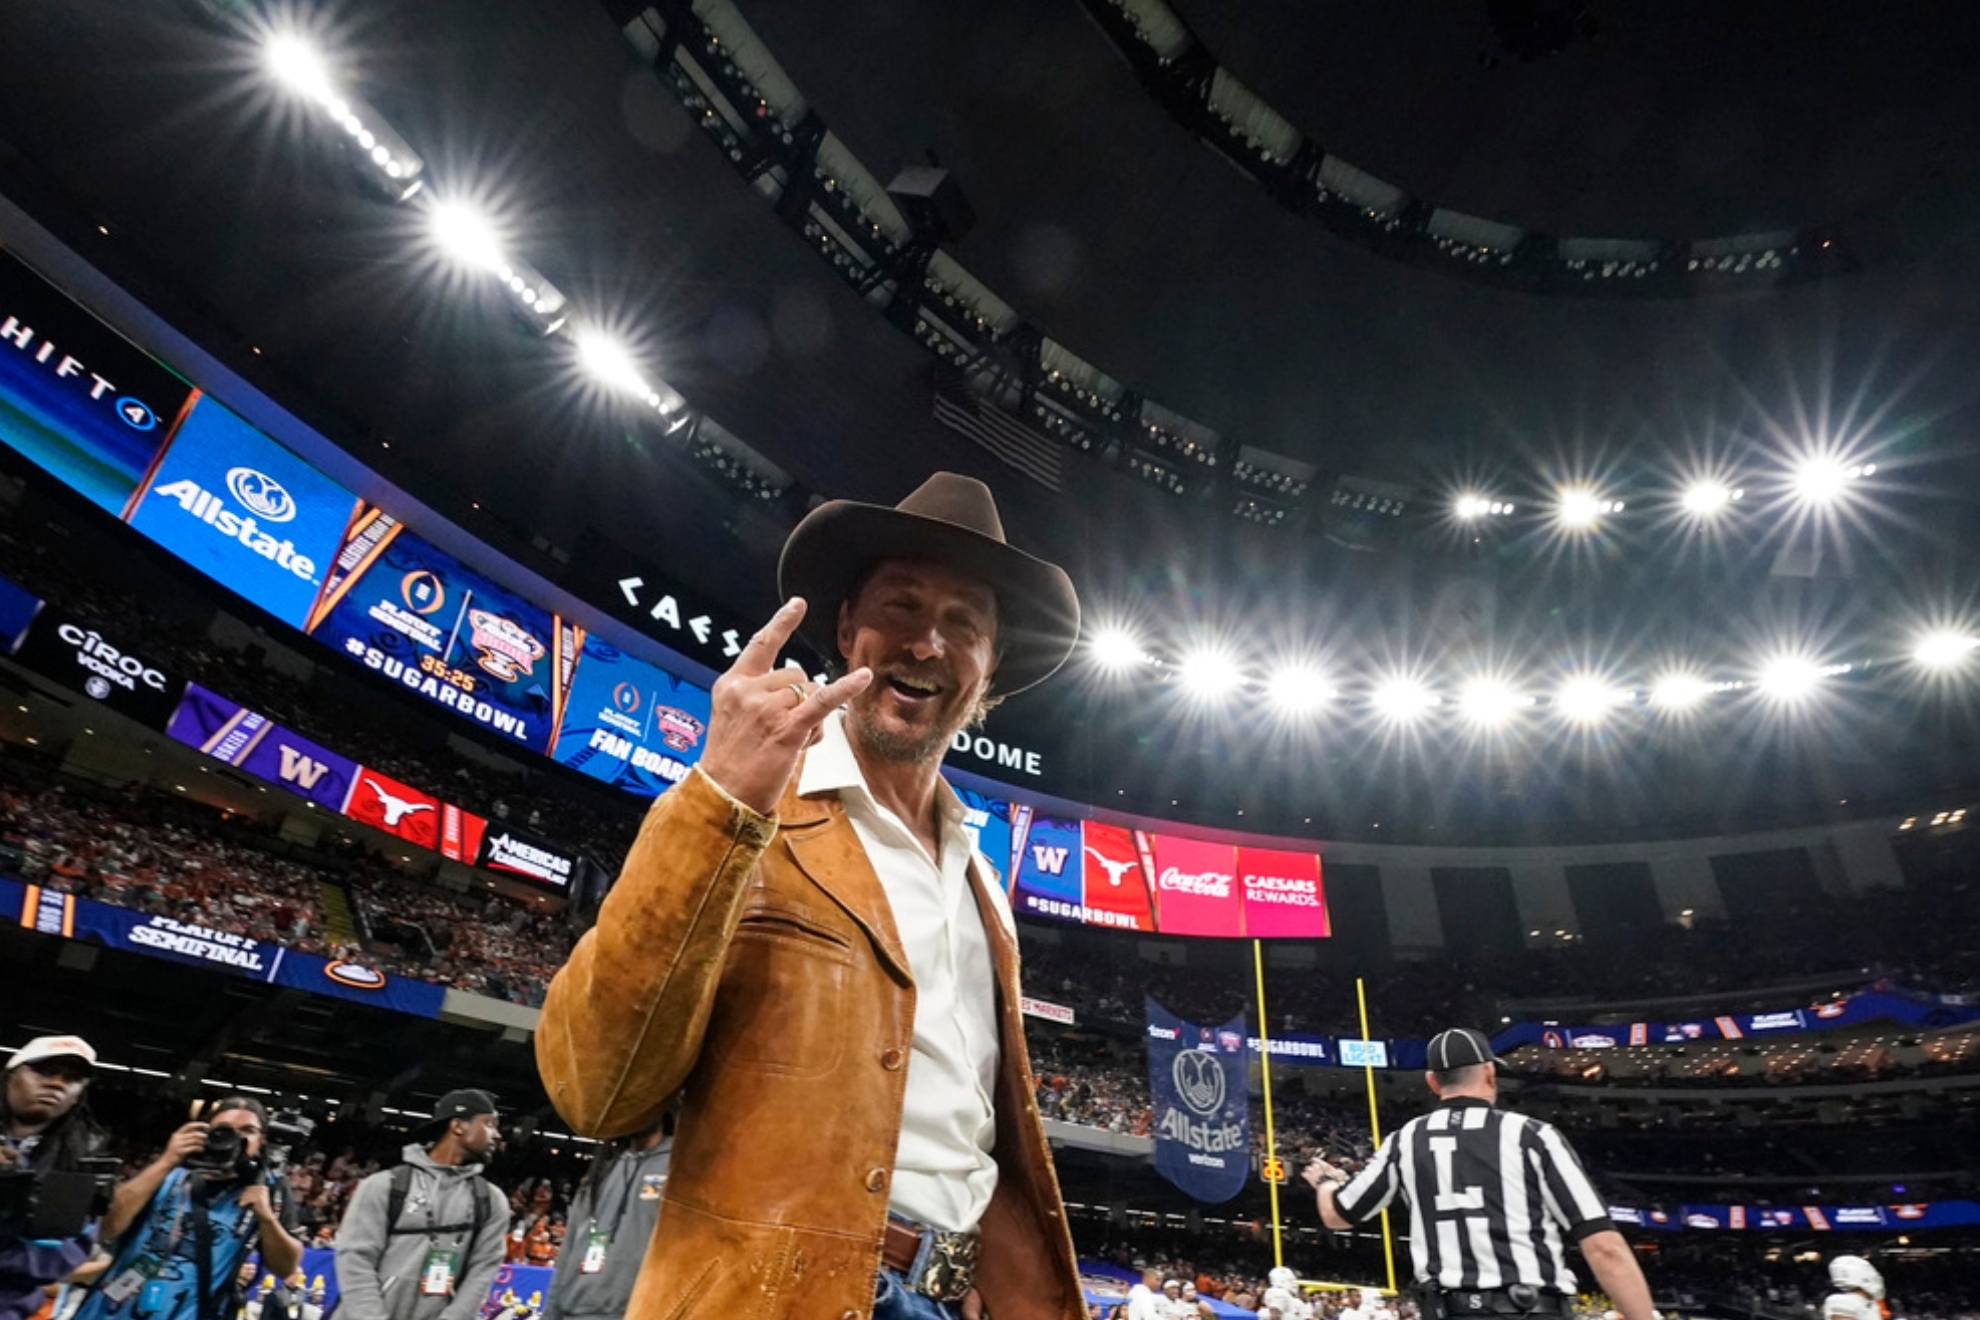 McConaughey has been a life-long Texas fan, frequently seen at their games